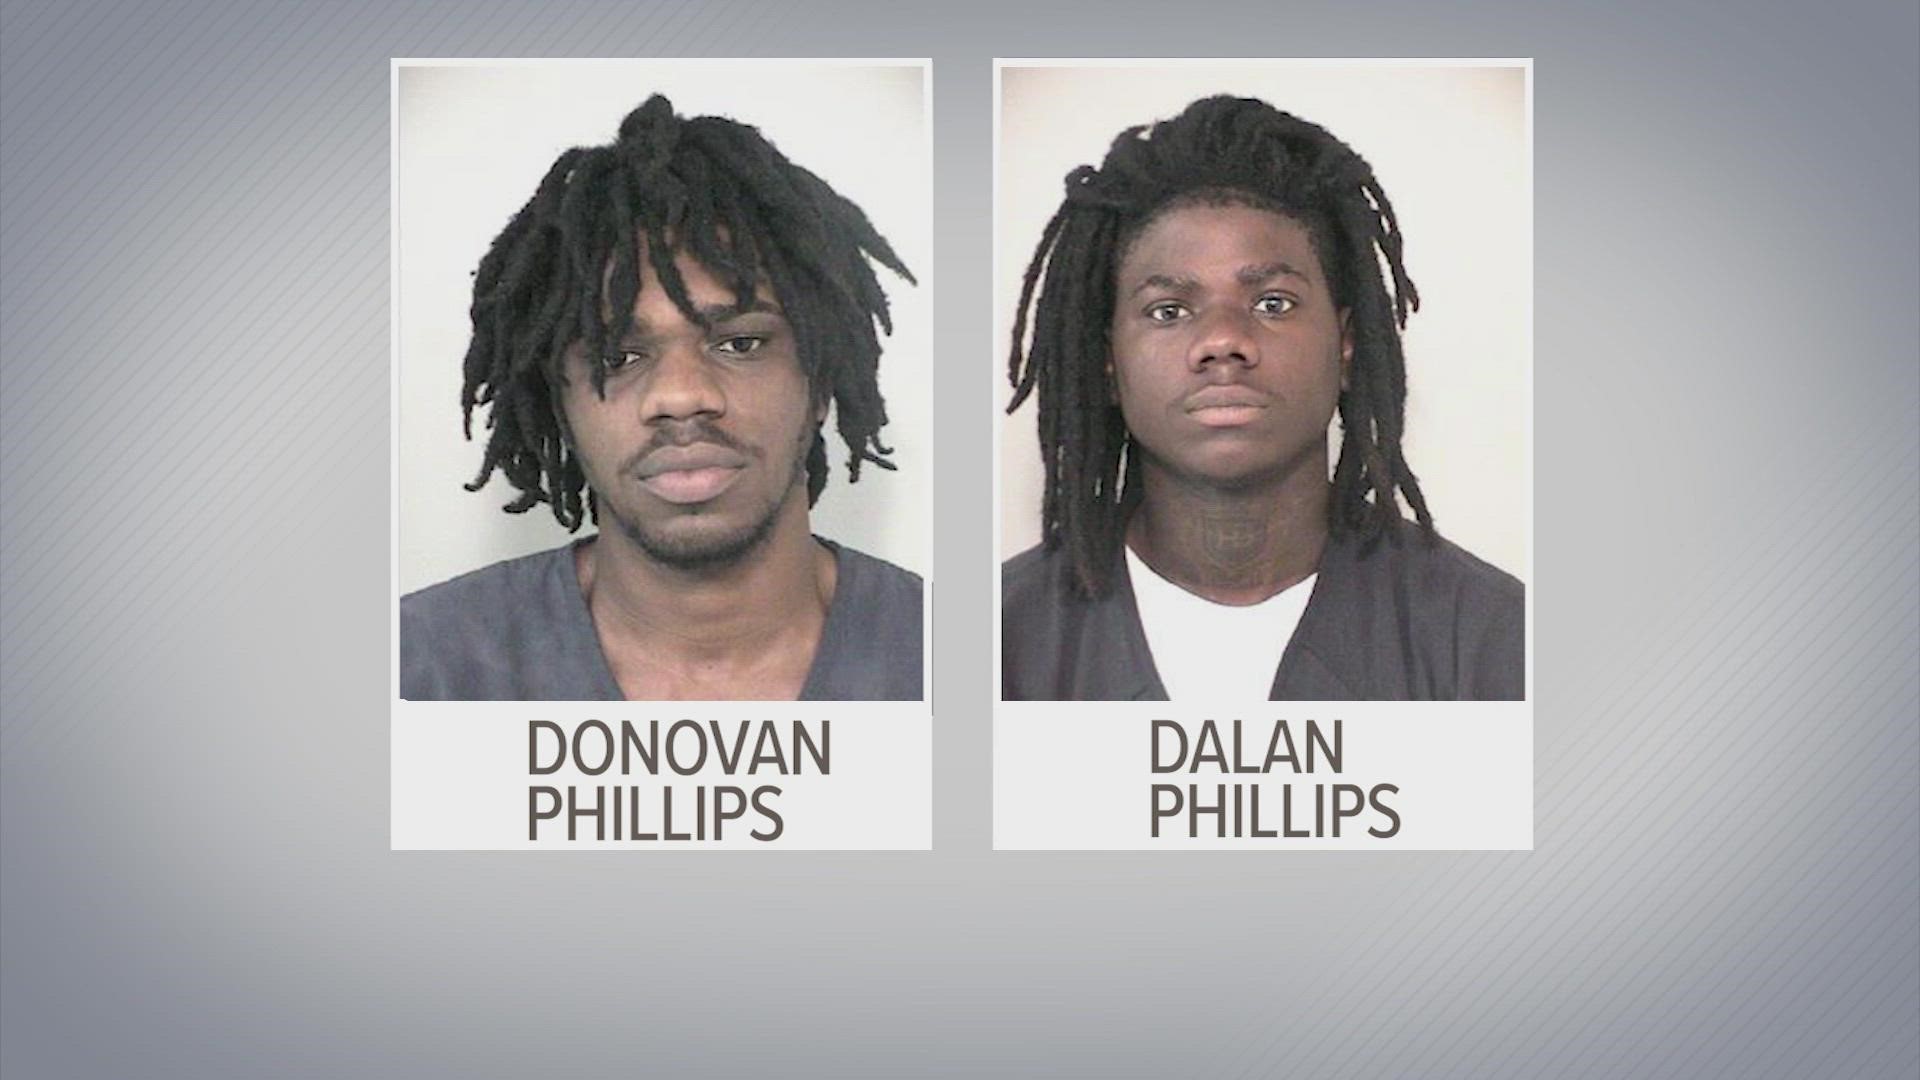 Donovan Phillips is scheduled to make his appearance at 1 p.m. and Dalan Phillips will be arraigned.